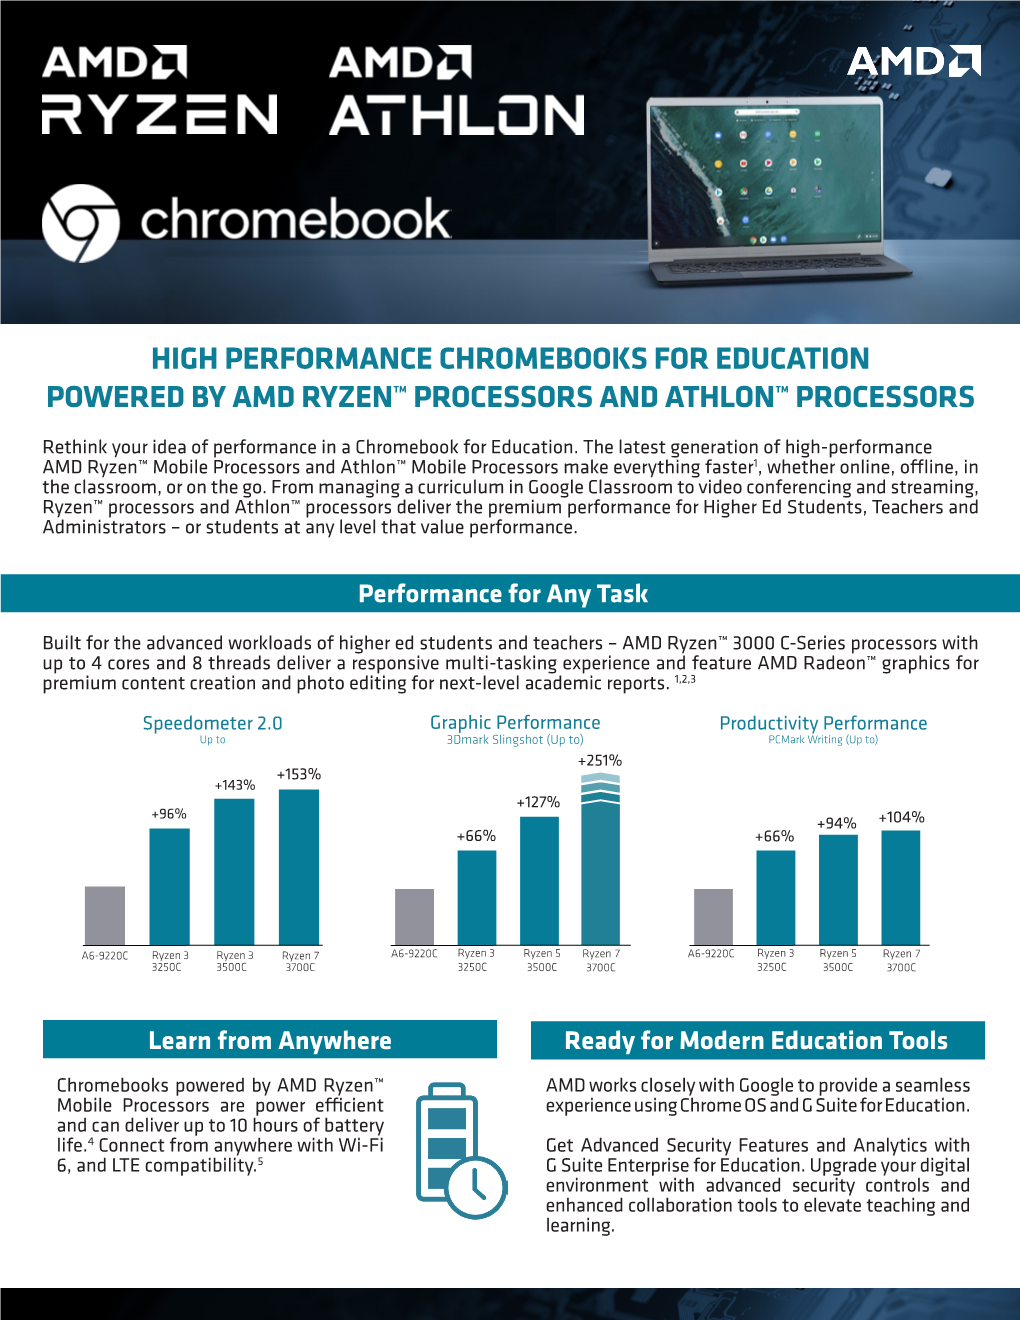 High Performance Chromebooks for Education Powered by Amd Ryzen™ Processors and Athlon™ Processors